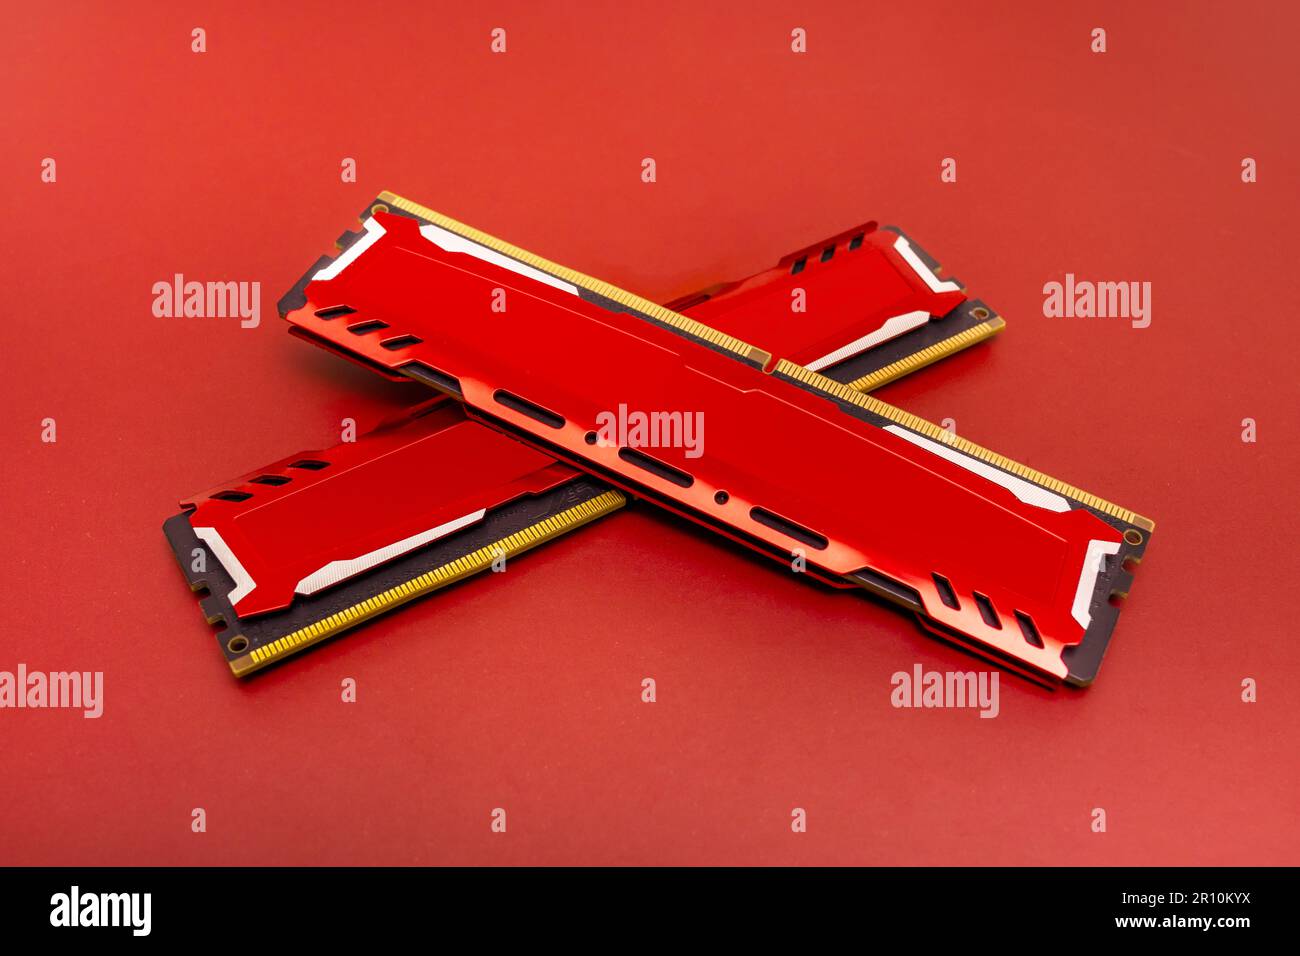 ddr4 ram memory cards with red aluminum heat sinks on a matching color  surface arranged in an x shape Stock Photo - Alamy